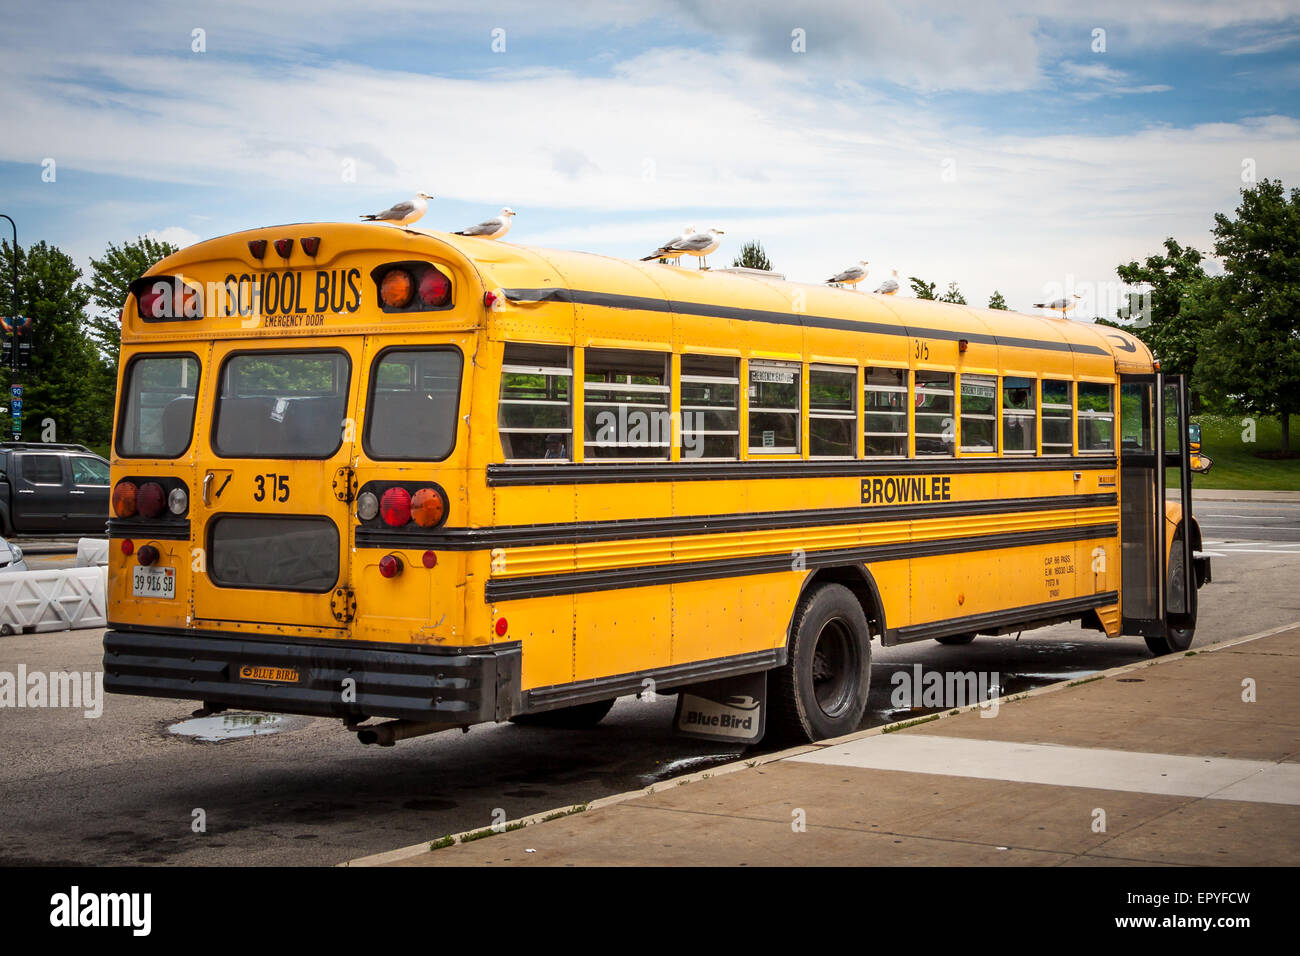 School bus at Chicago Stock Photo